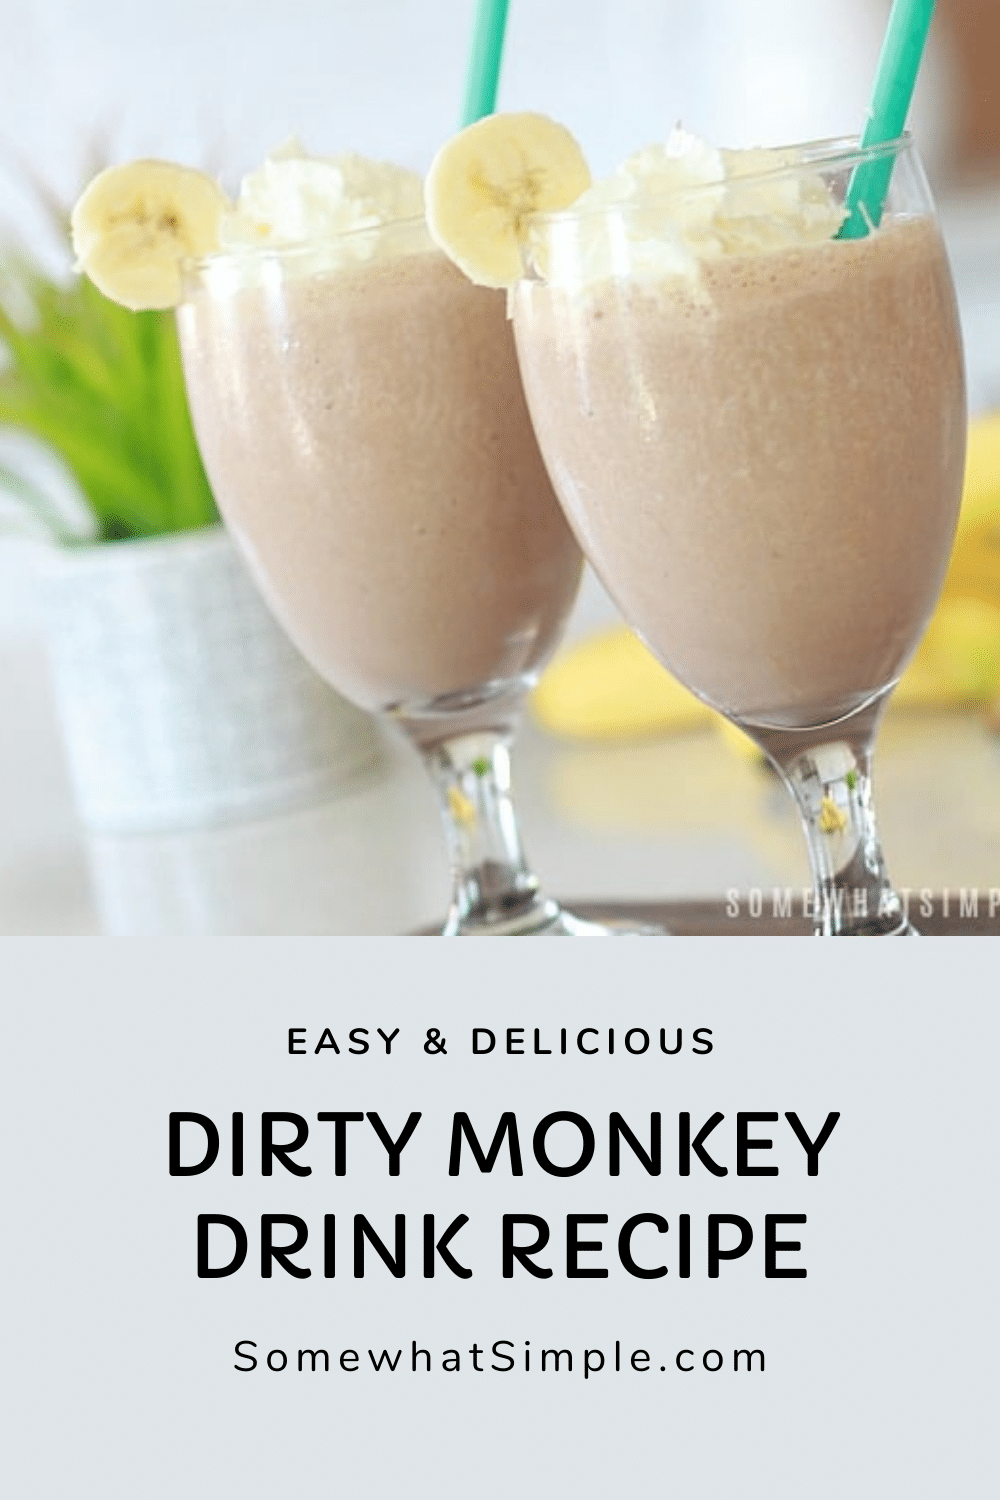 This non-alcoholic dirty monkey drink recipe is a delicious and easy frozen mocktail recipe.  Made with bananas, cream and chocolate, this frozen drink recipe is a refreshing option for a sunny day. Some people call them dirty bananas or dirty monkeys but no matter what you call them, they're delicious! via @somewhatsimple